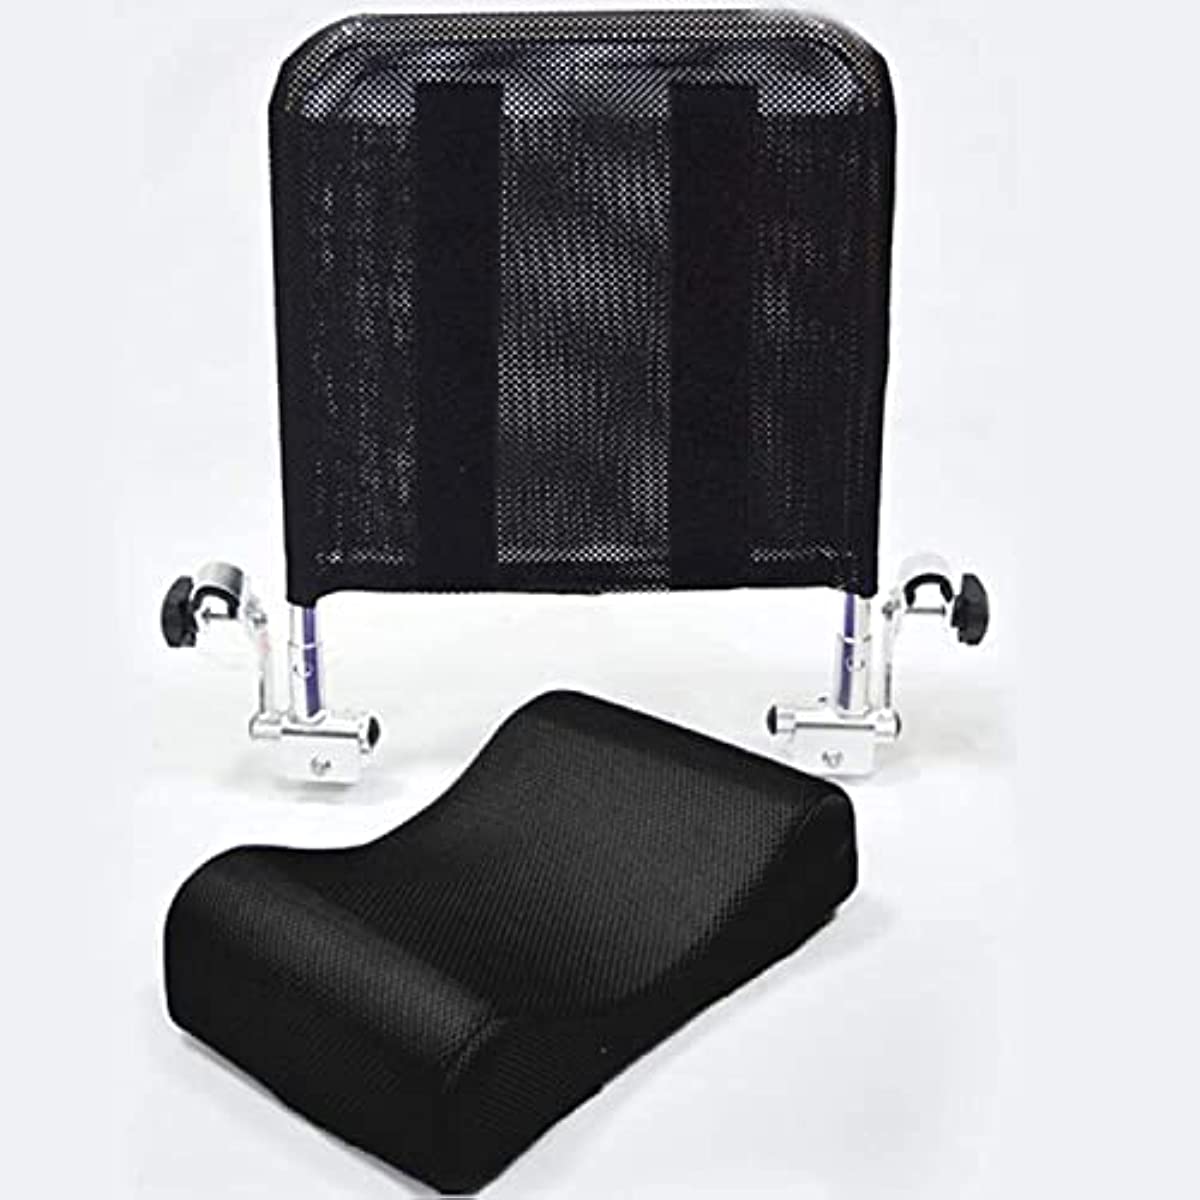 Huapa Wheelchair Headrest Backrest,Headrest Neck Support Comfortable Seat Back Cushion U Type Pillow Adjustable Angle Low Repulsion Breathable Universal Wheelchair Accessories Toilet Chair(Black)